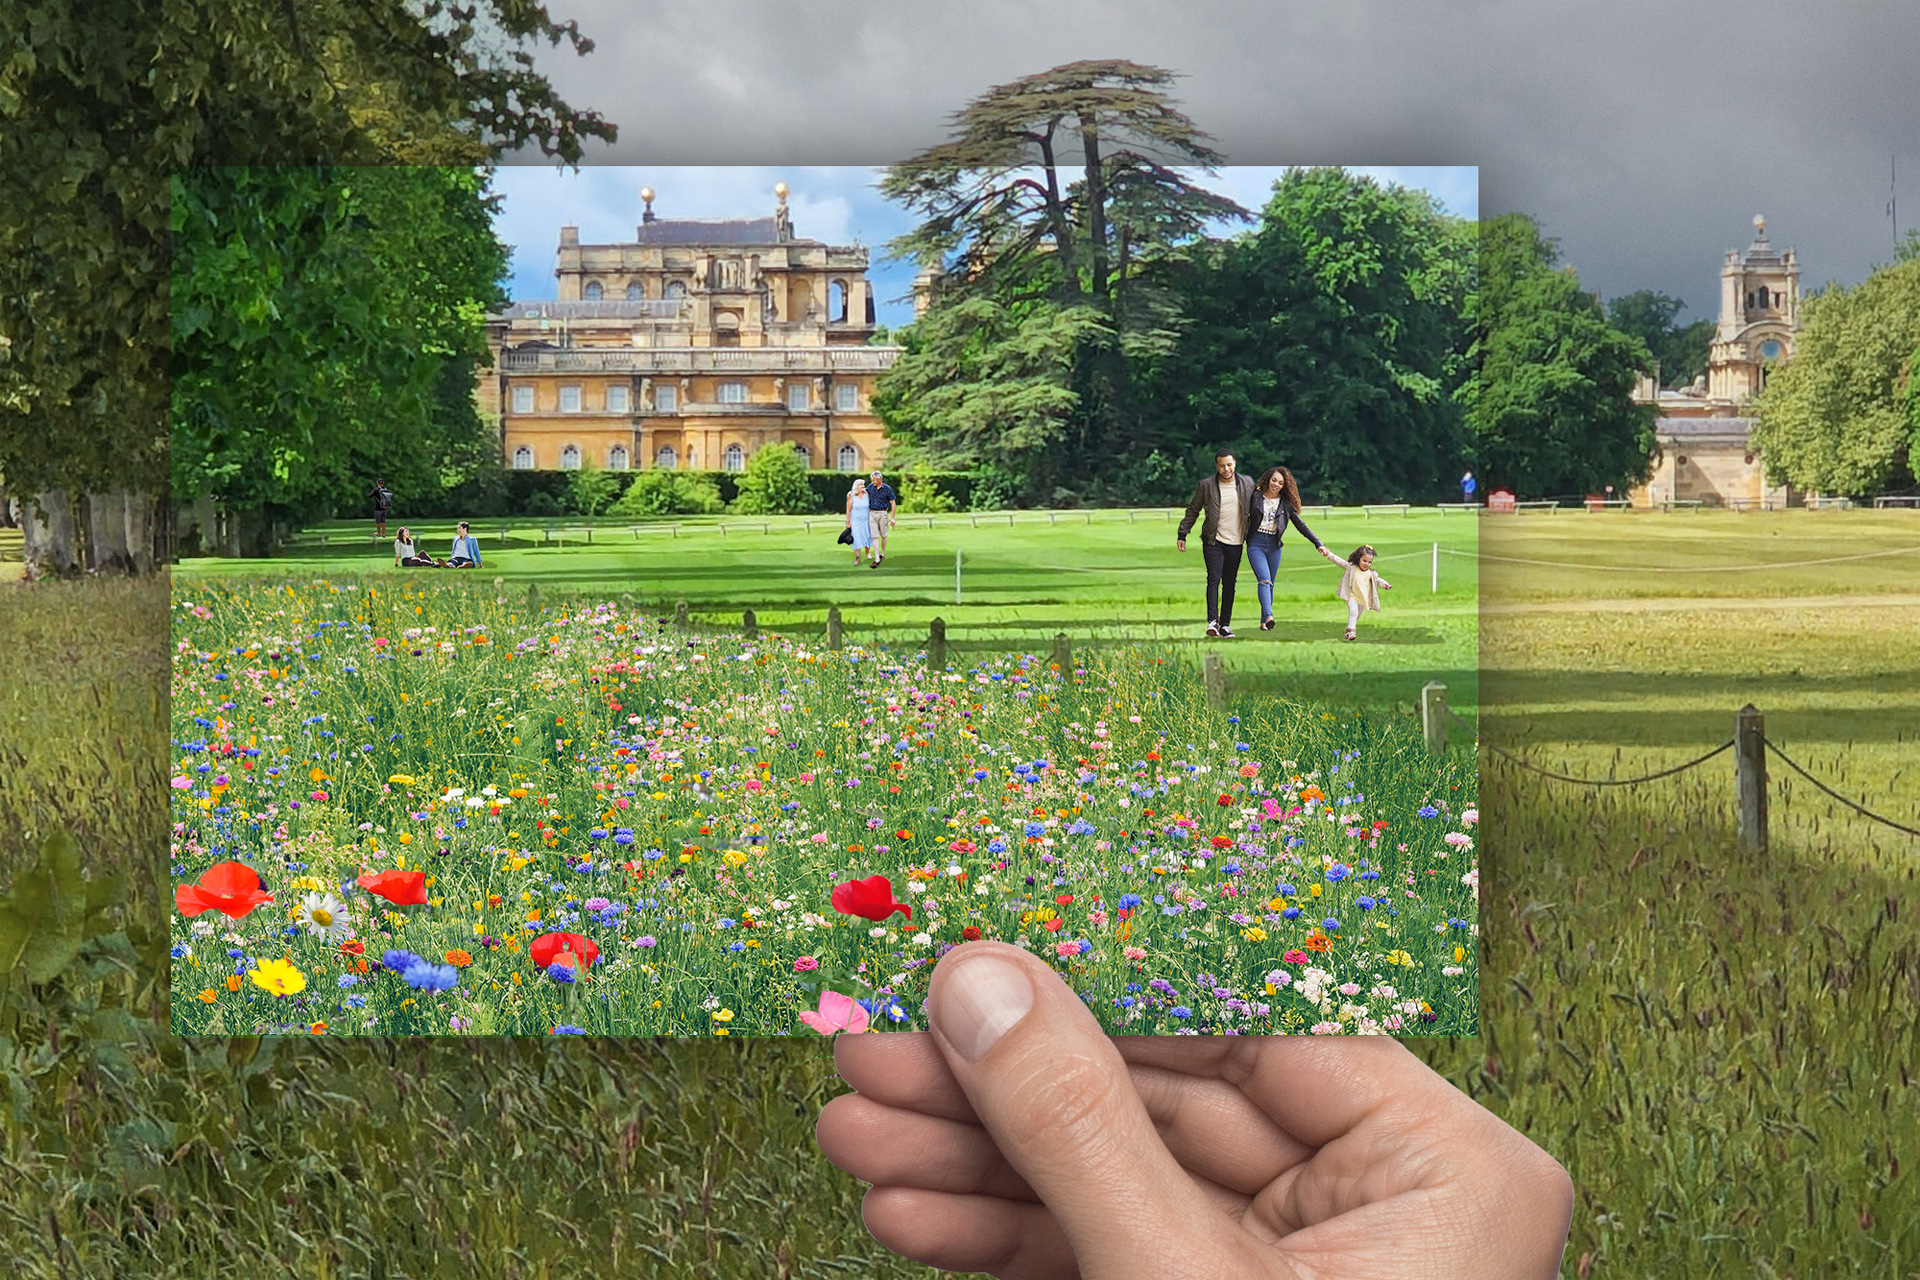 A postcard overlaying an image showing the future of Blenheim Wildflowers